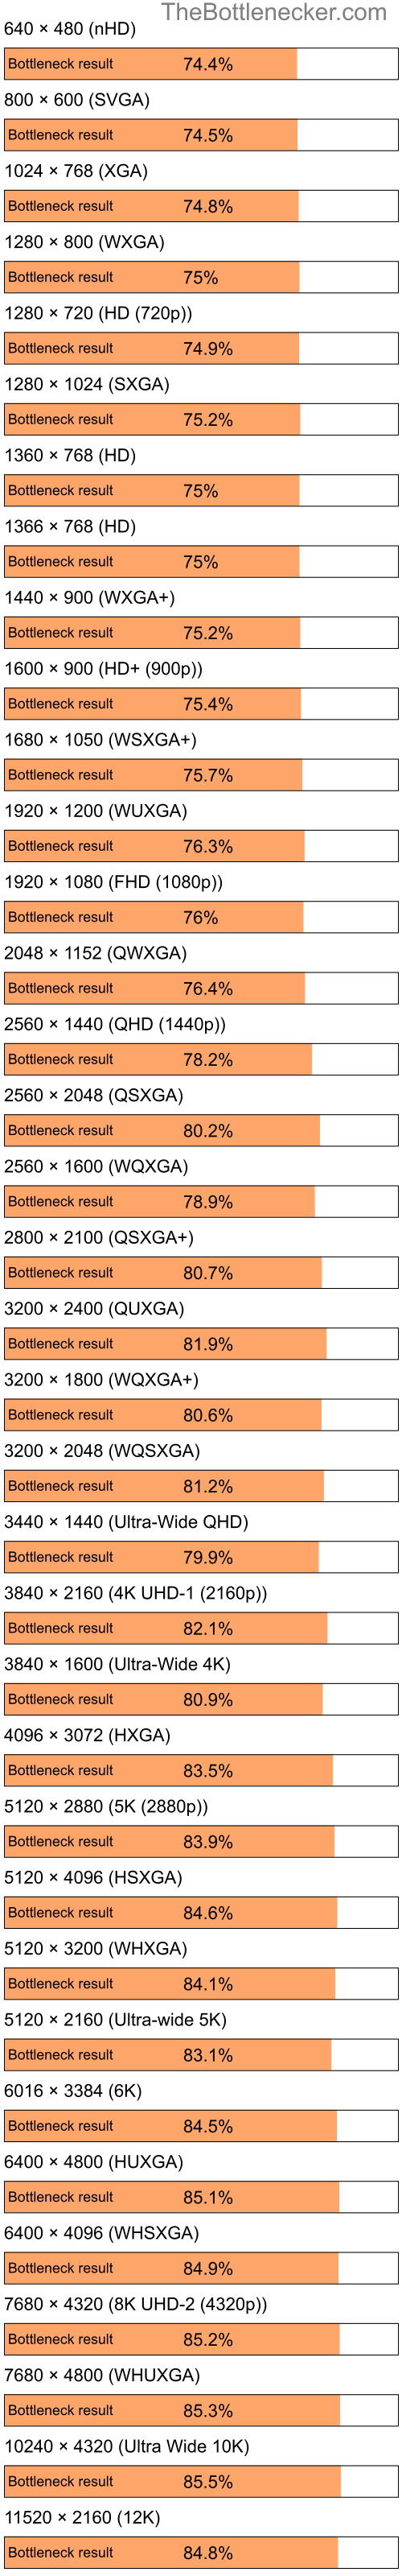 Bottleneck results by resolution for Intel Celeron M 410 and AMD Mobility Radeon X1350 in General Tasks